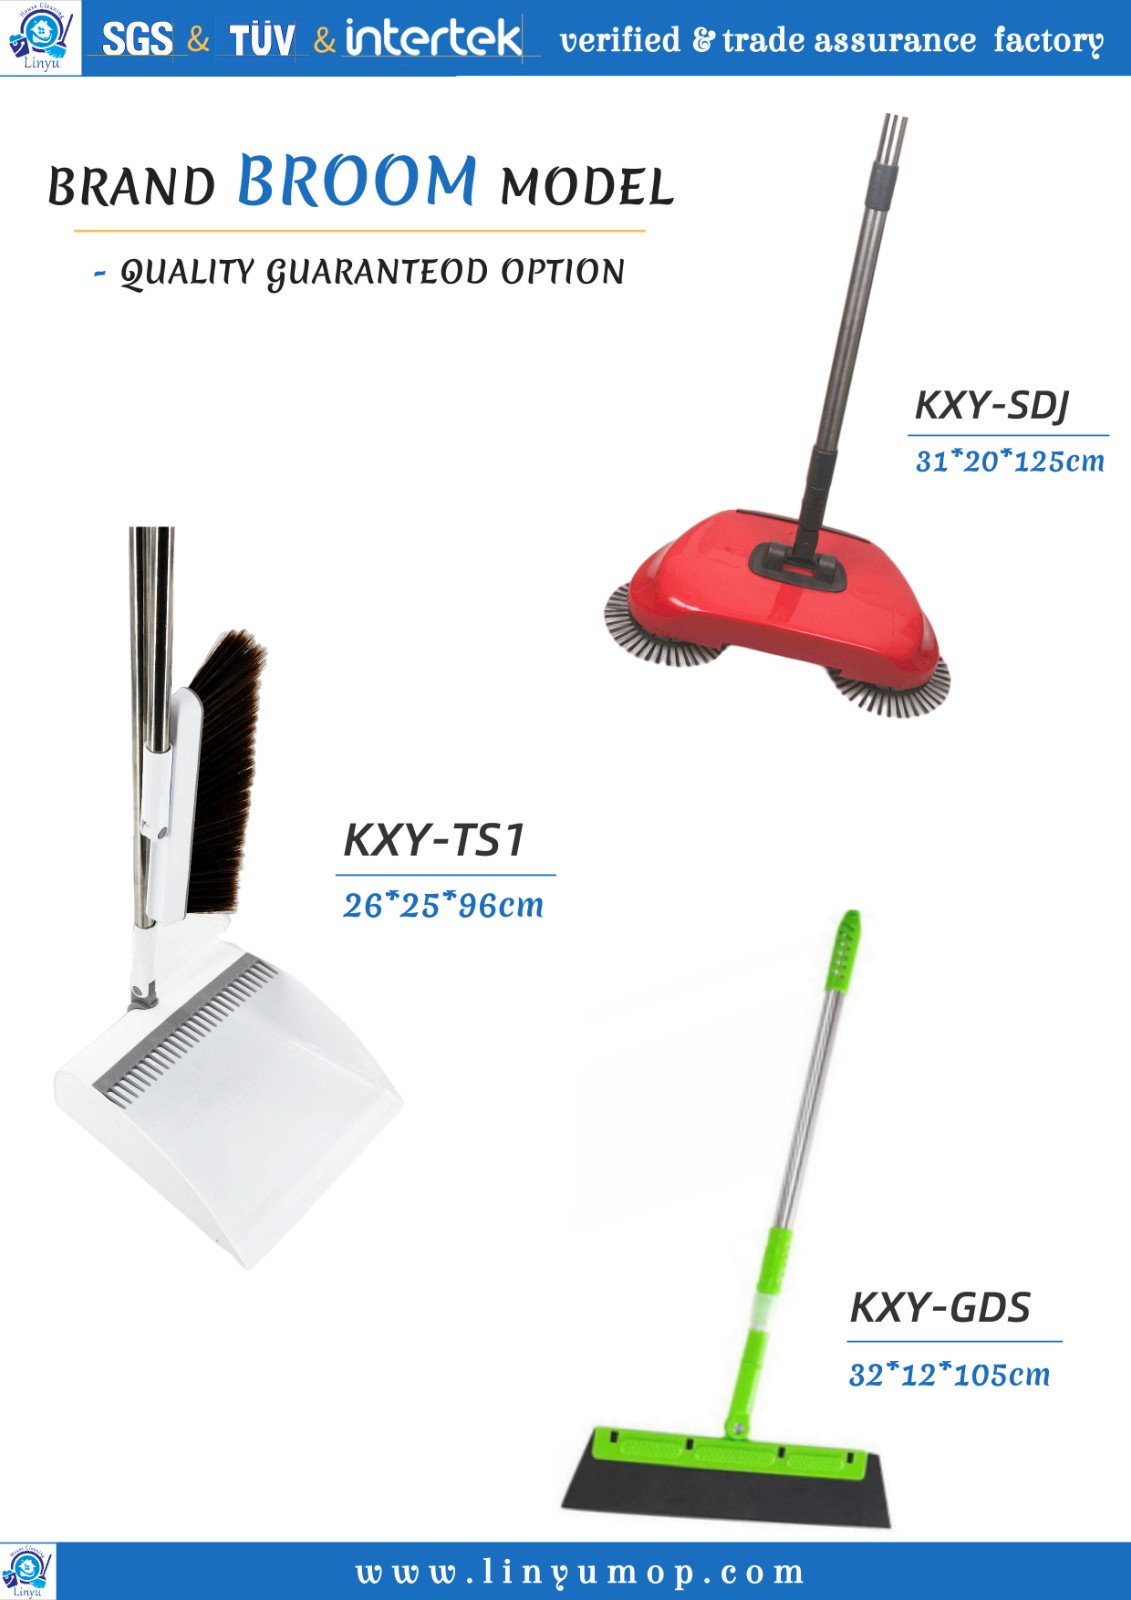 Which mop is best for home use?